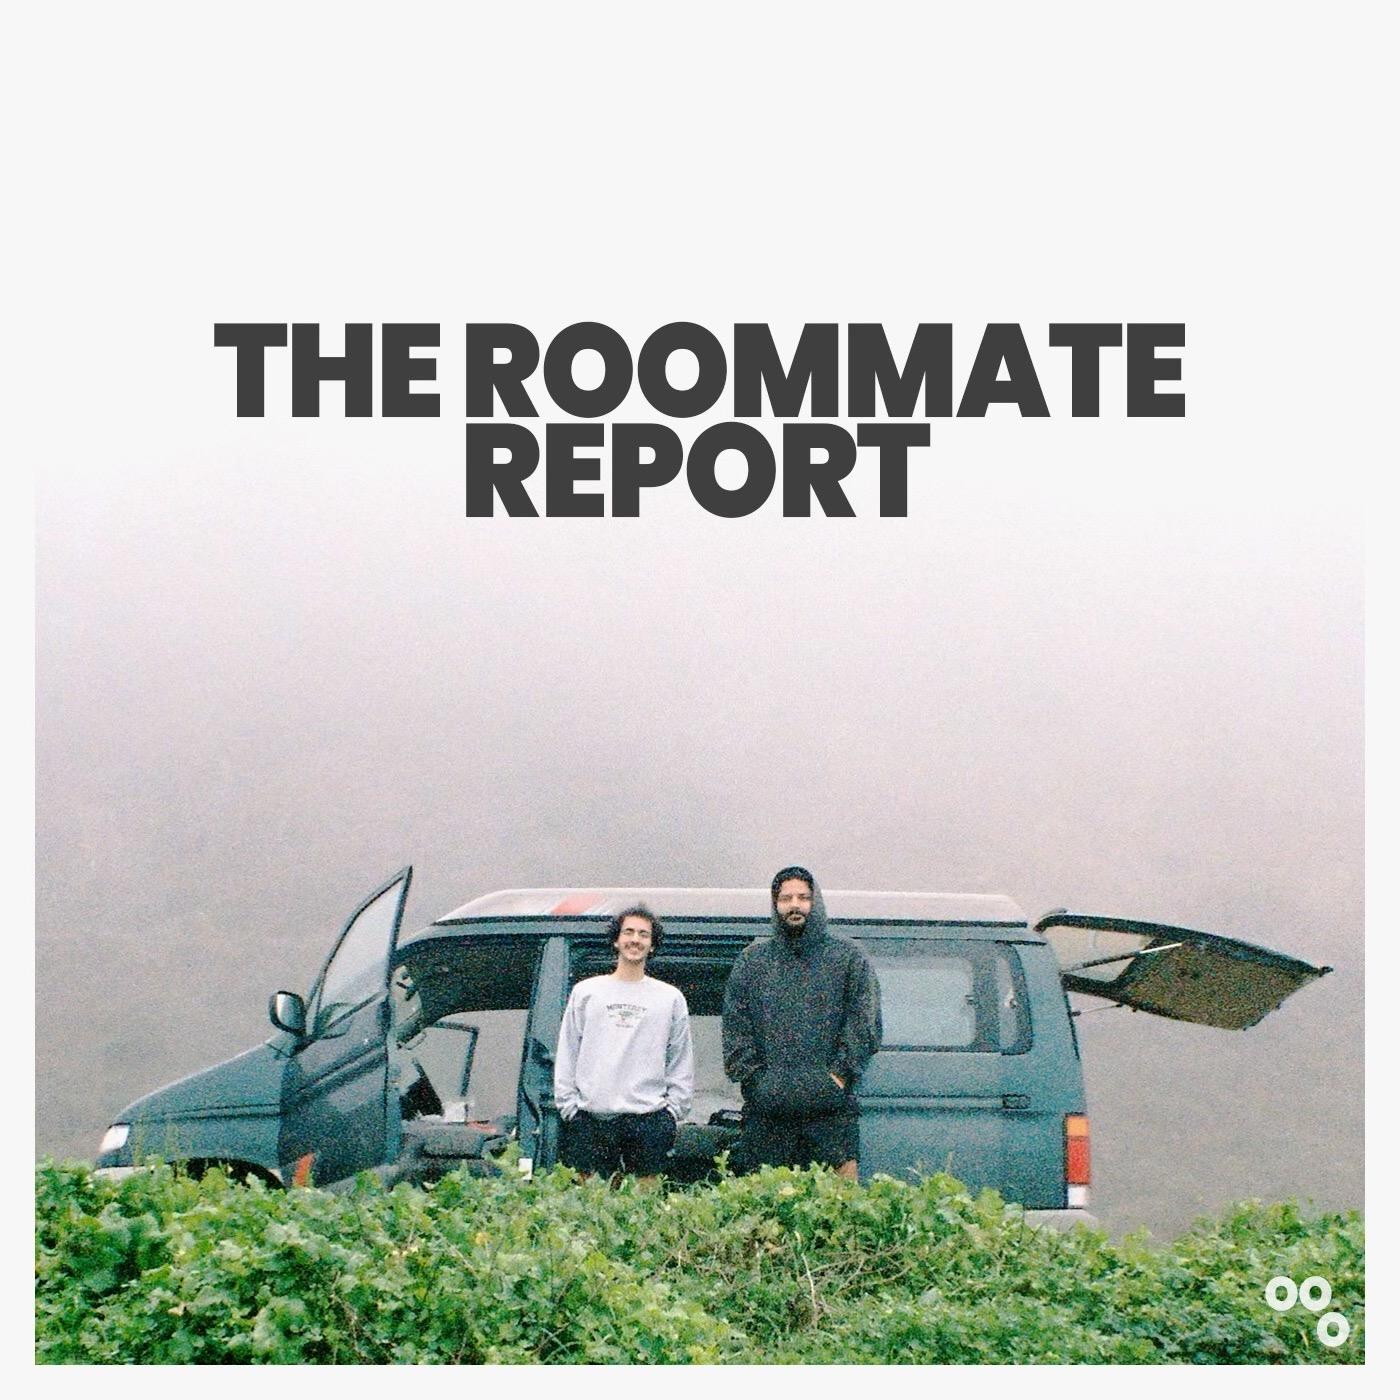 The Roommate Report